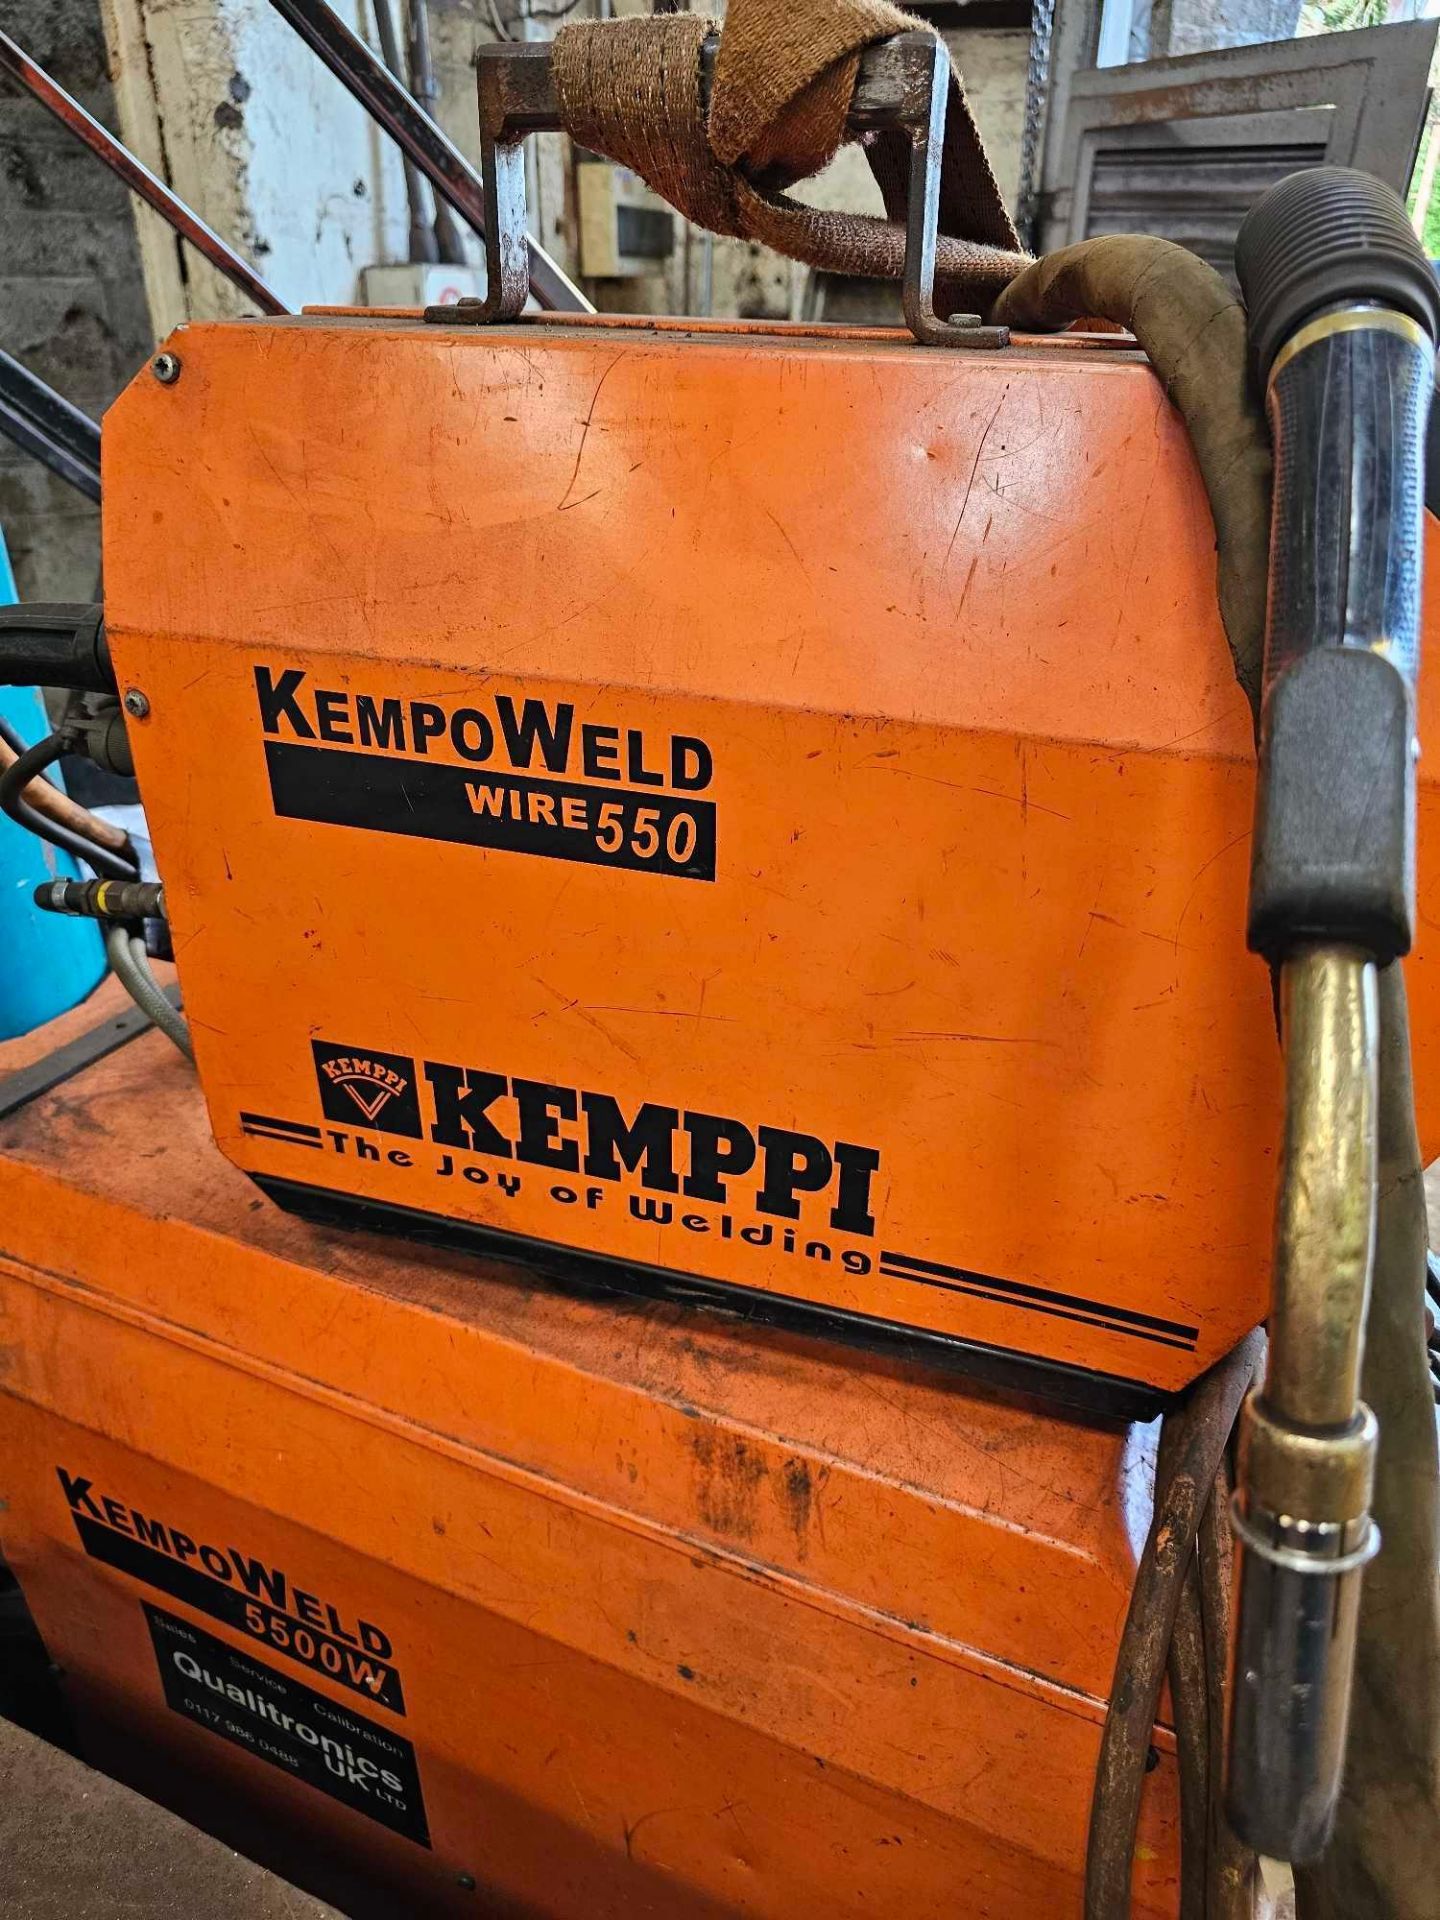 Kemppi Kempoweld 5500W Complete With Kempo Wire 550 Feeder - Image 4 of 4